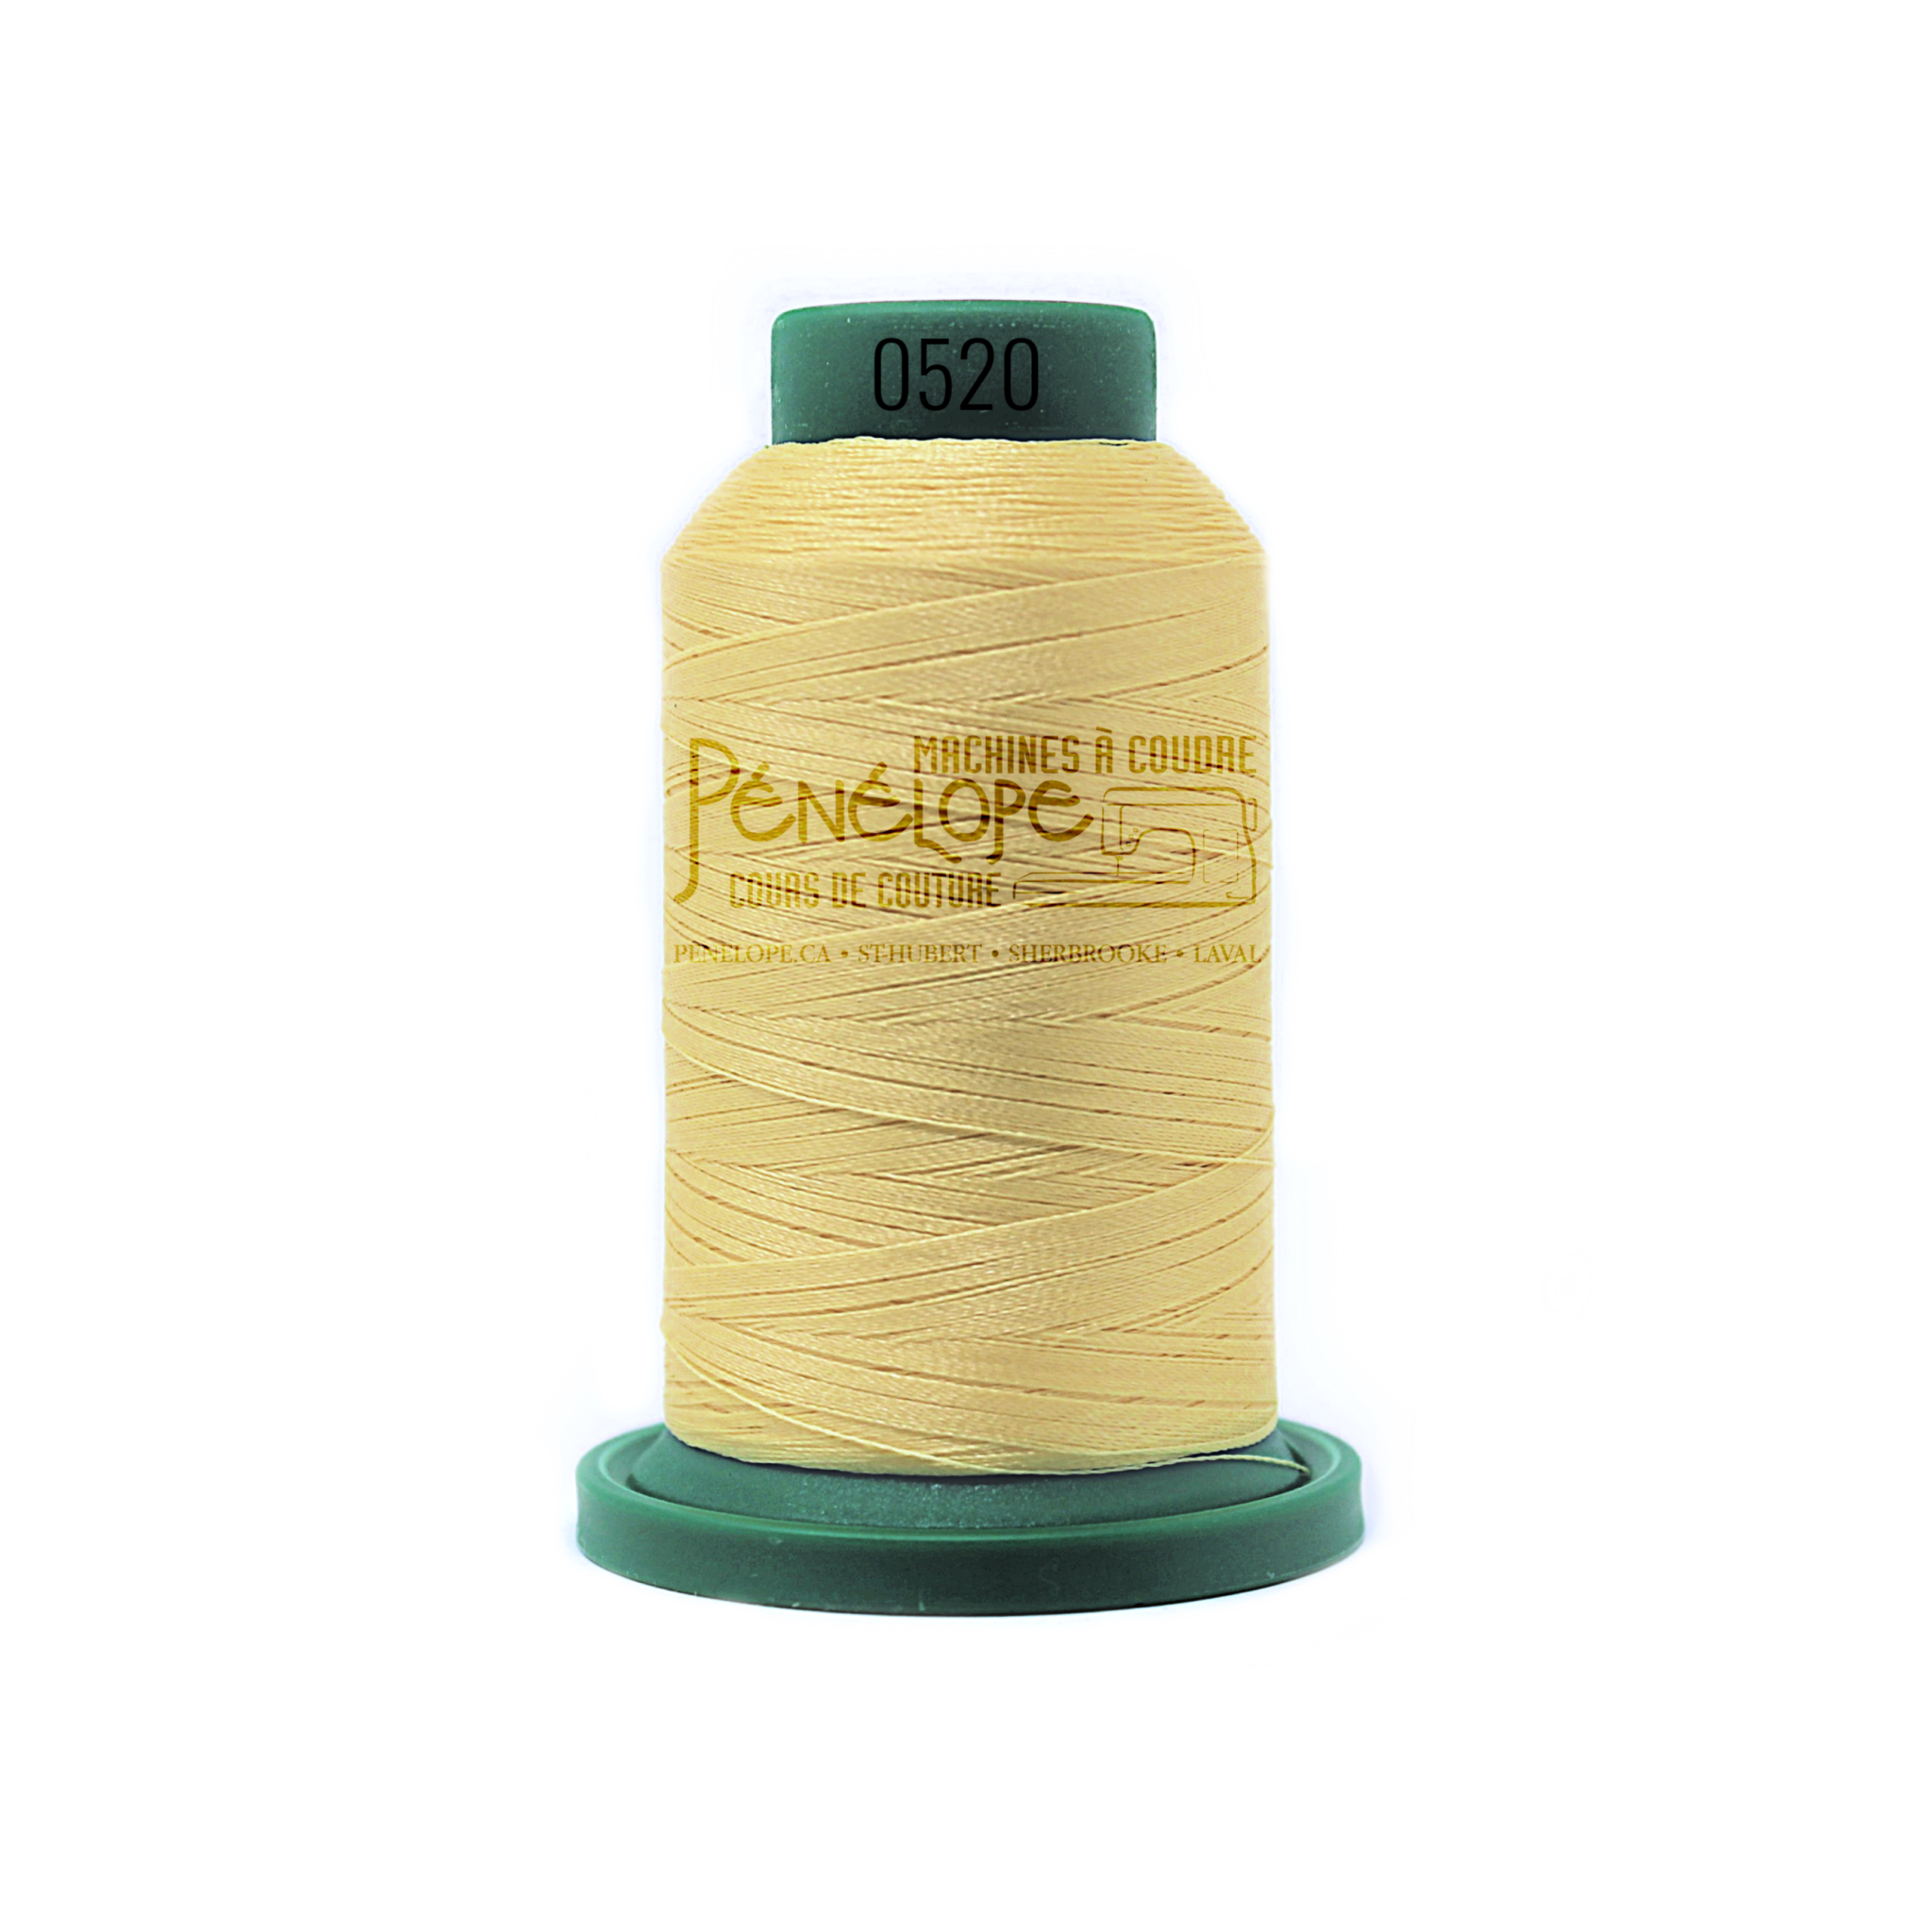 Isacord Isacord sewing and embroidery thread 0520